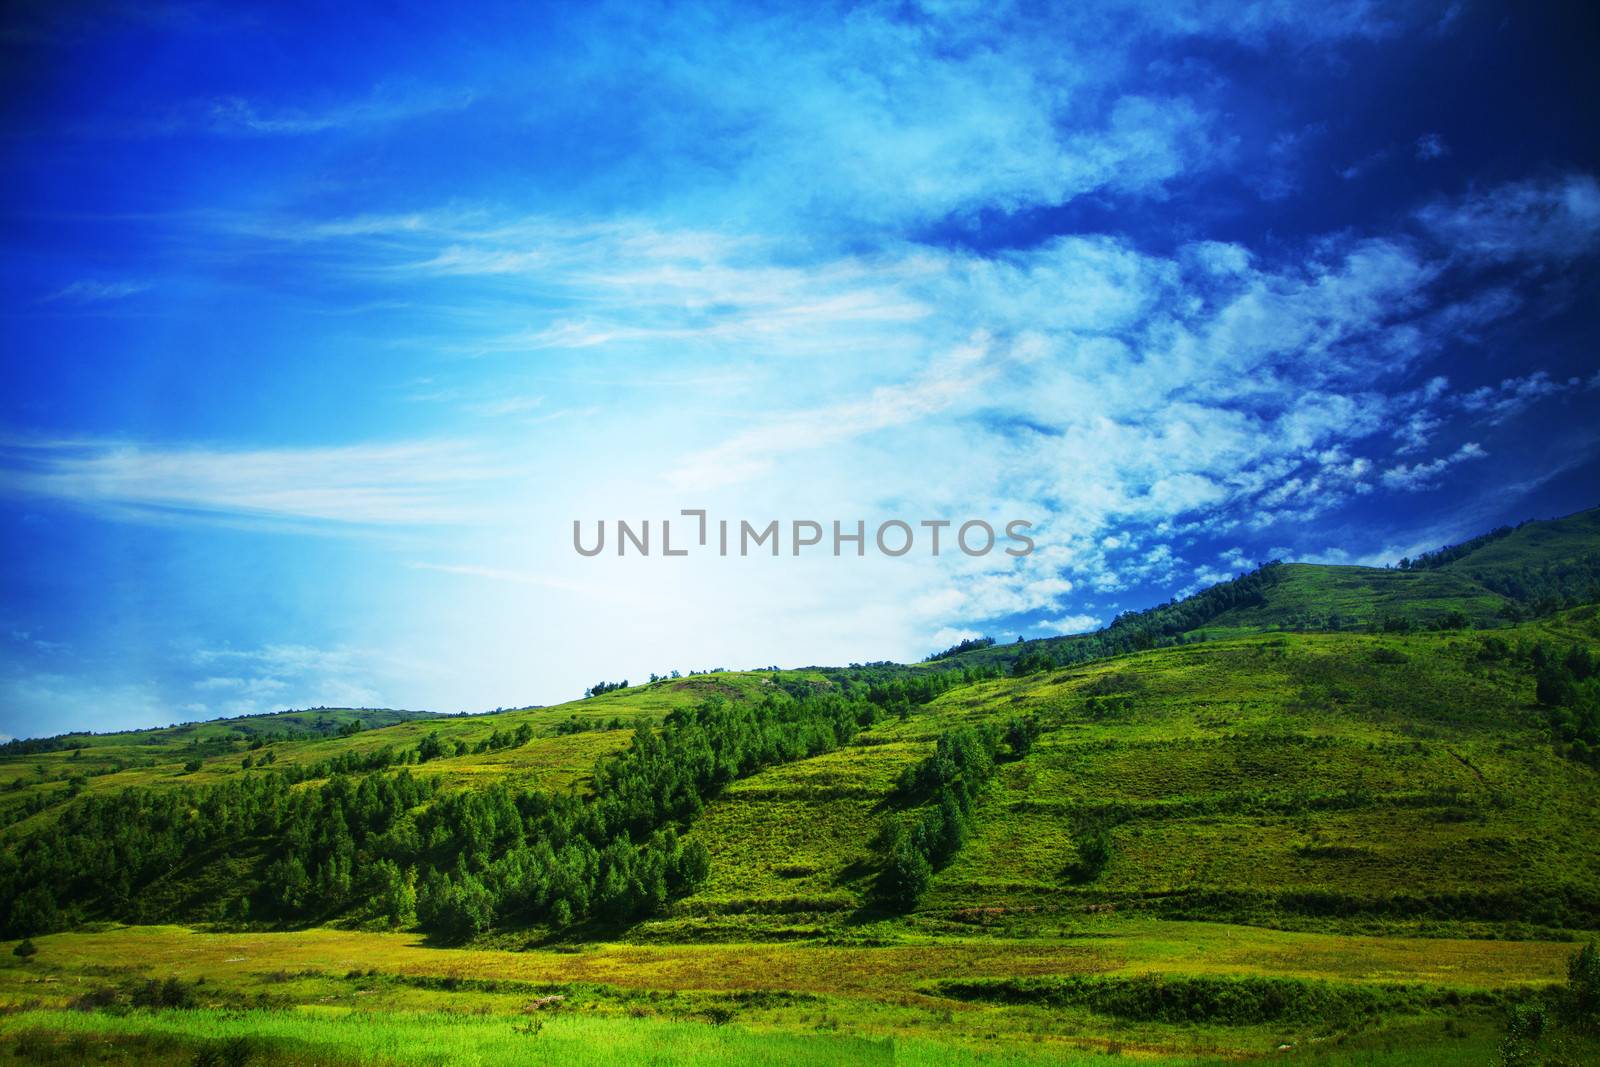 Lush, green landscape with blue sky and clouds.